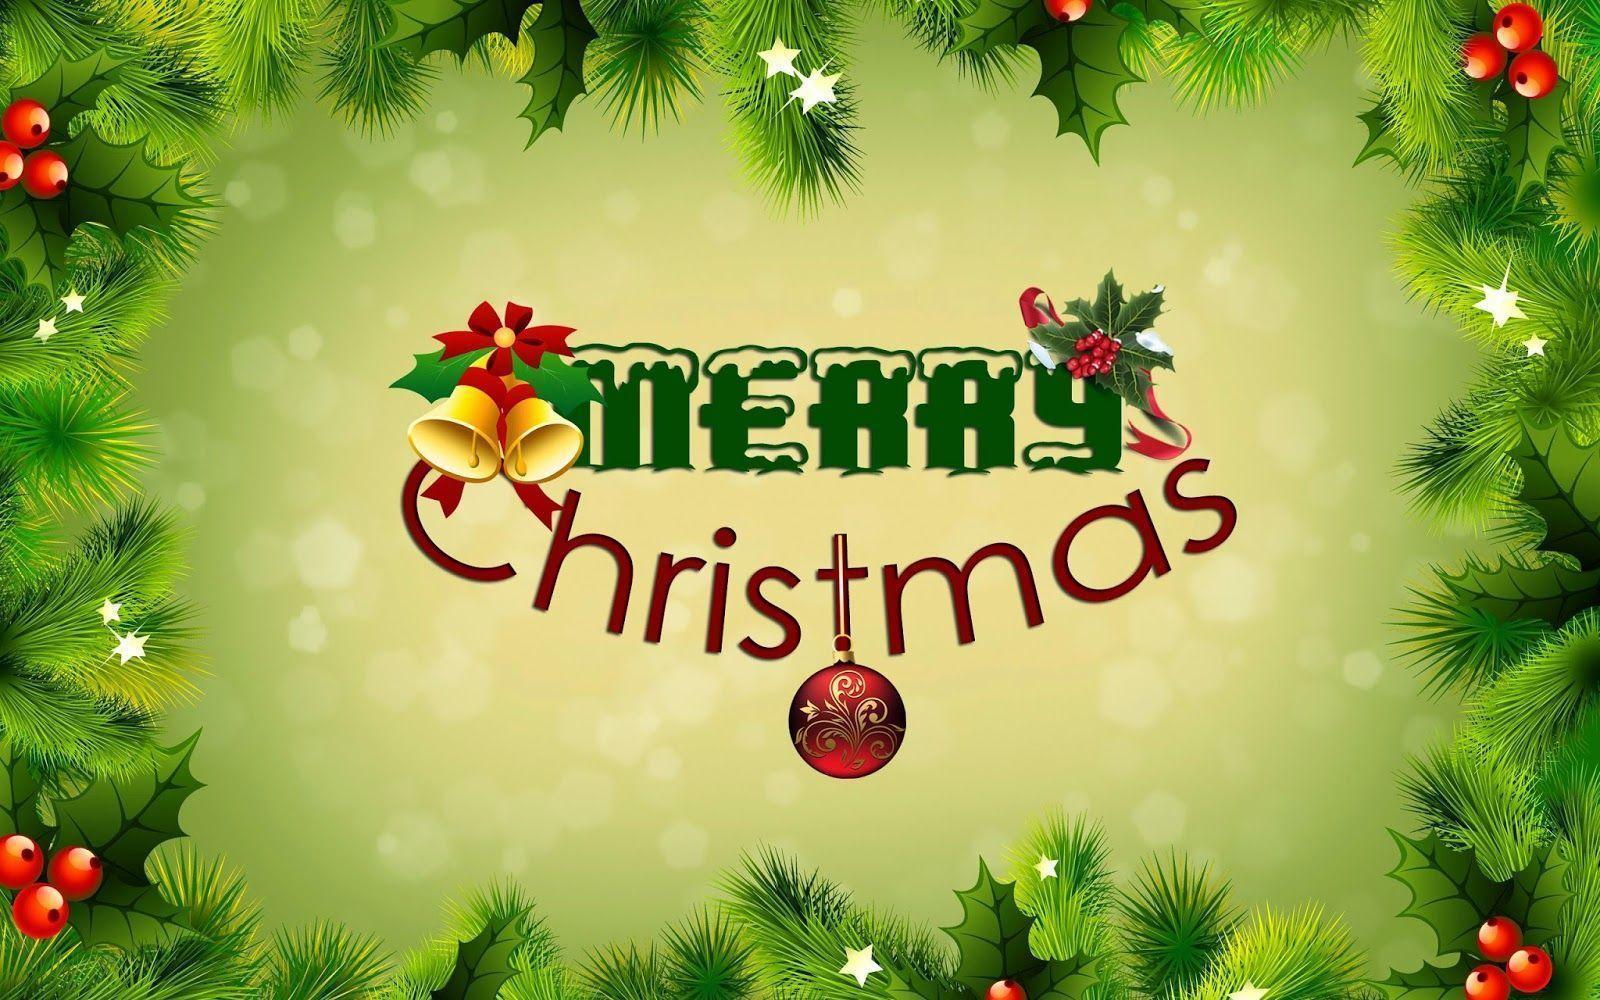 Merry Christmas Wallpapers 2017 - Wallpaper Cave